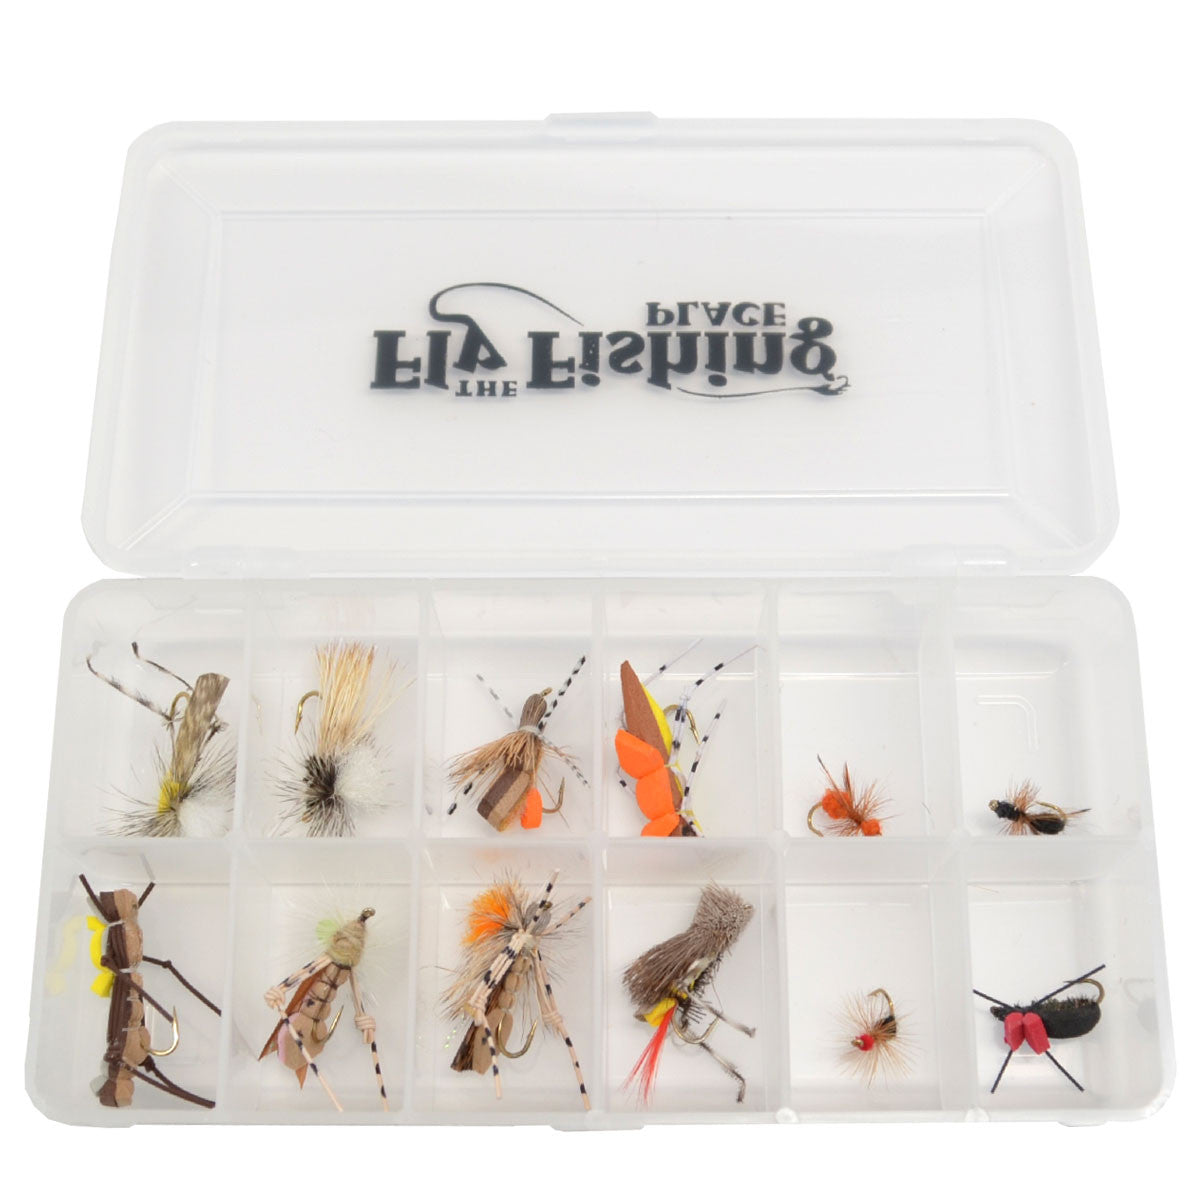  Fly Fishing Flies Dry Flies Assortment Handmade Fly Fishing  Lures Nymph Head Bead Flies for Trout bass with Package Box(16PC 8 Patterns Carp  Flies Collection) : Everything Else